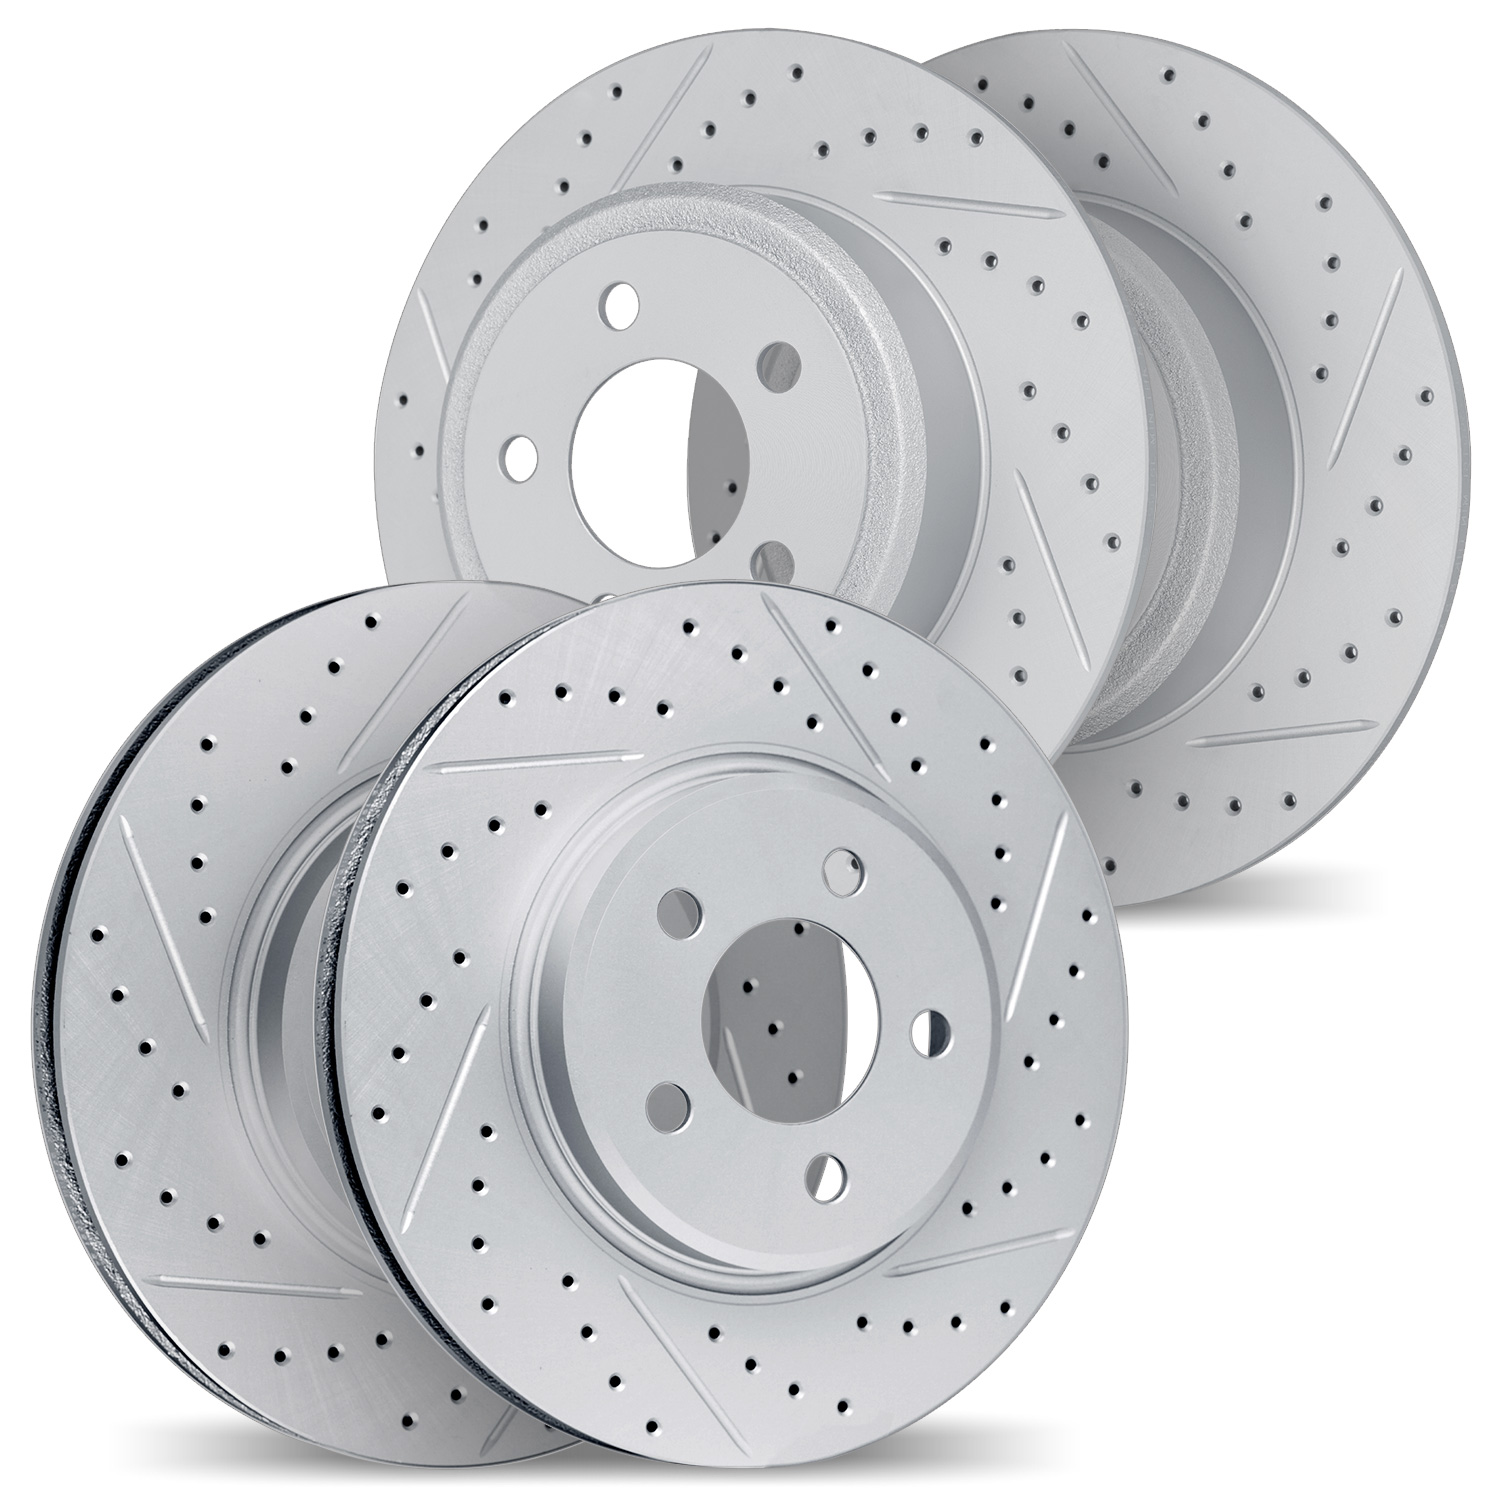 2004-42004 Geoperformance Drilled/Slotted Brake Rotors, 2007-2012 Mopar, Position: Front and Rear